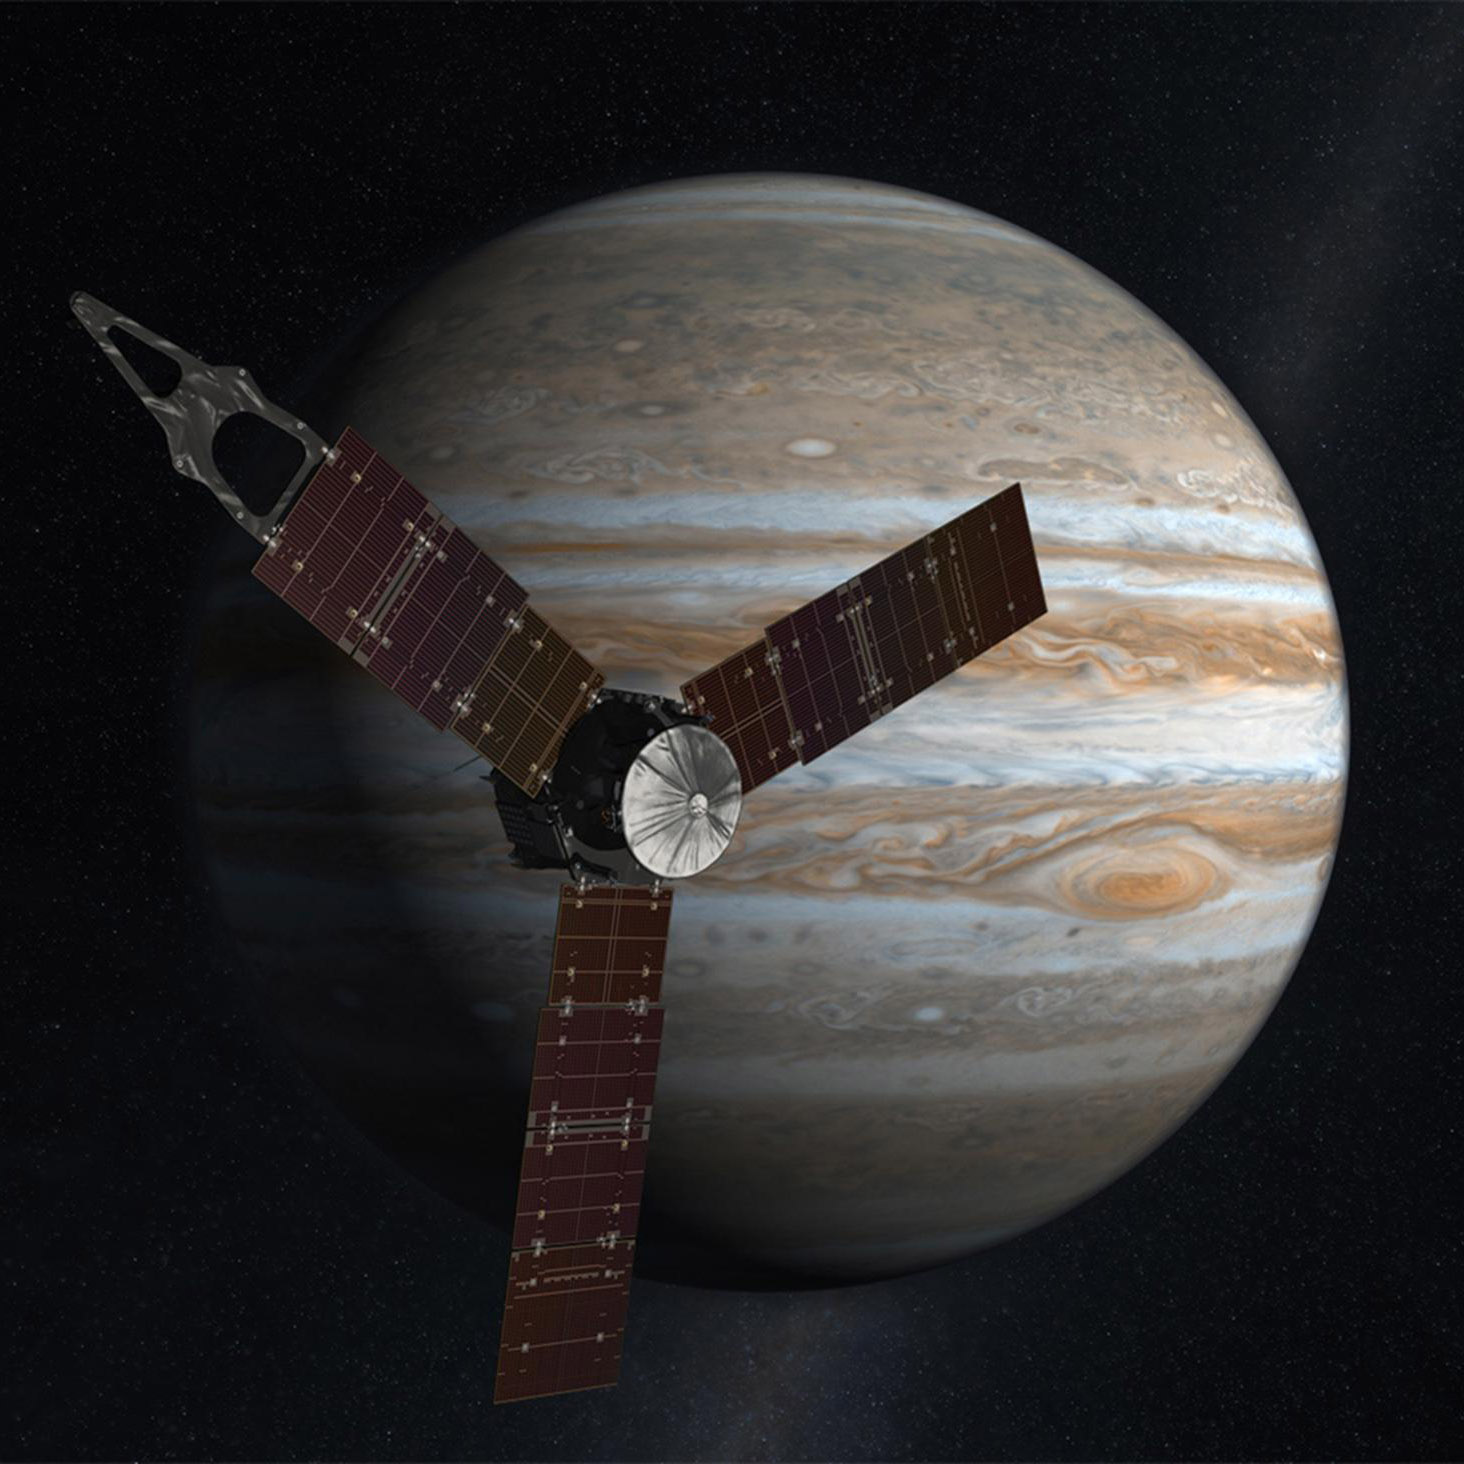 Juno Detects Jupiter's Highest-Energy Ions - Eos